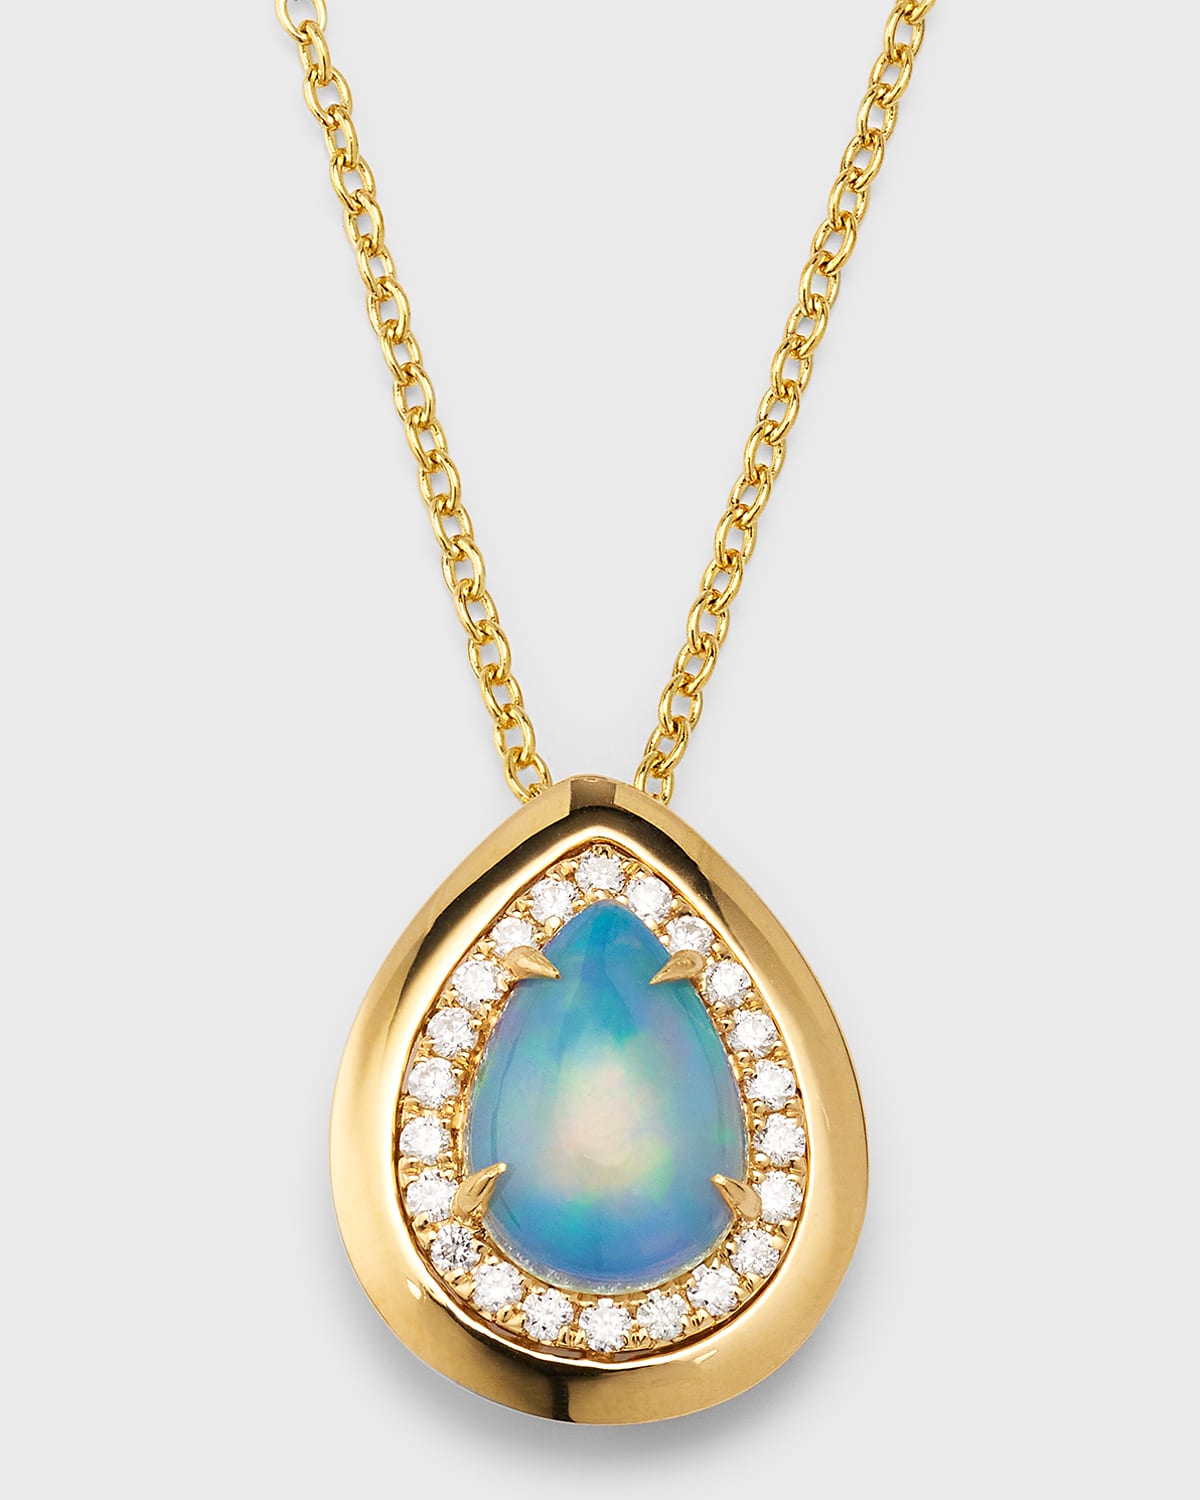 David Kord 18k Yellow Gold Pendant With Oval Opal And Diamonds, 2.31tcw